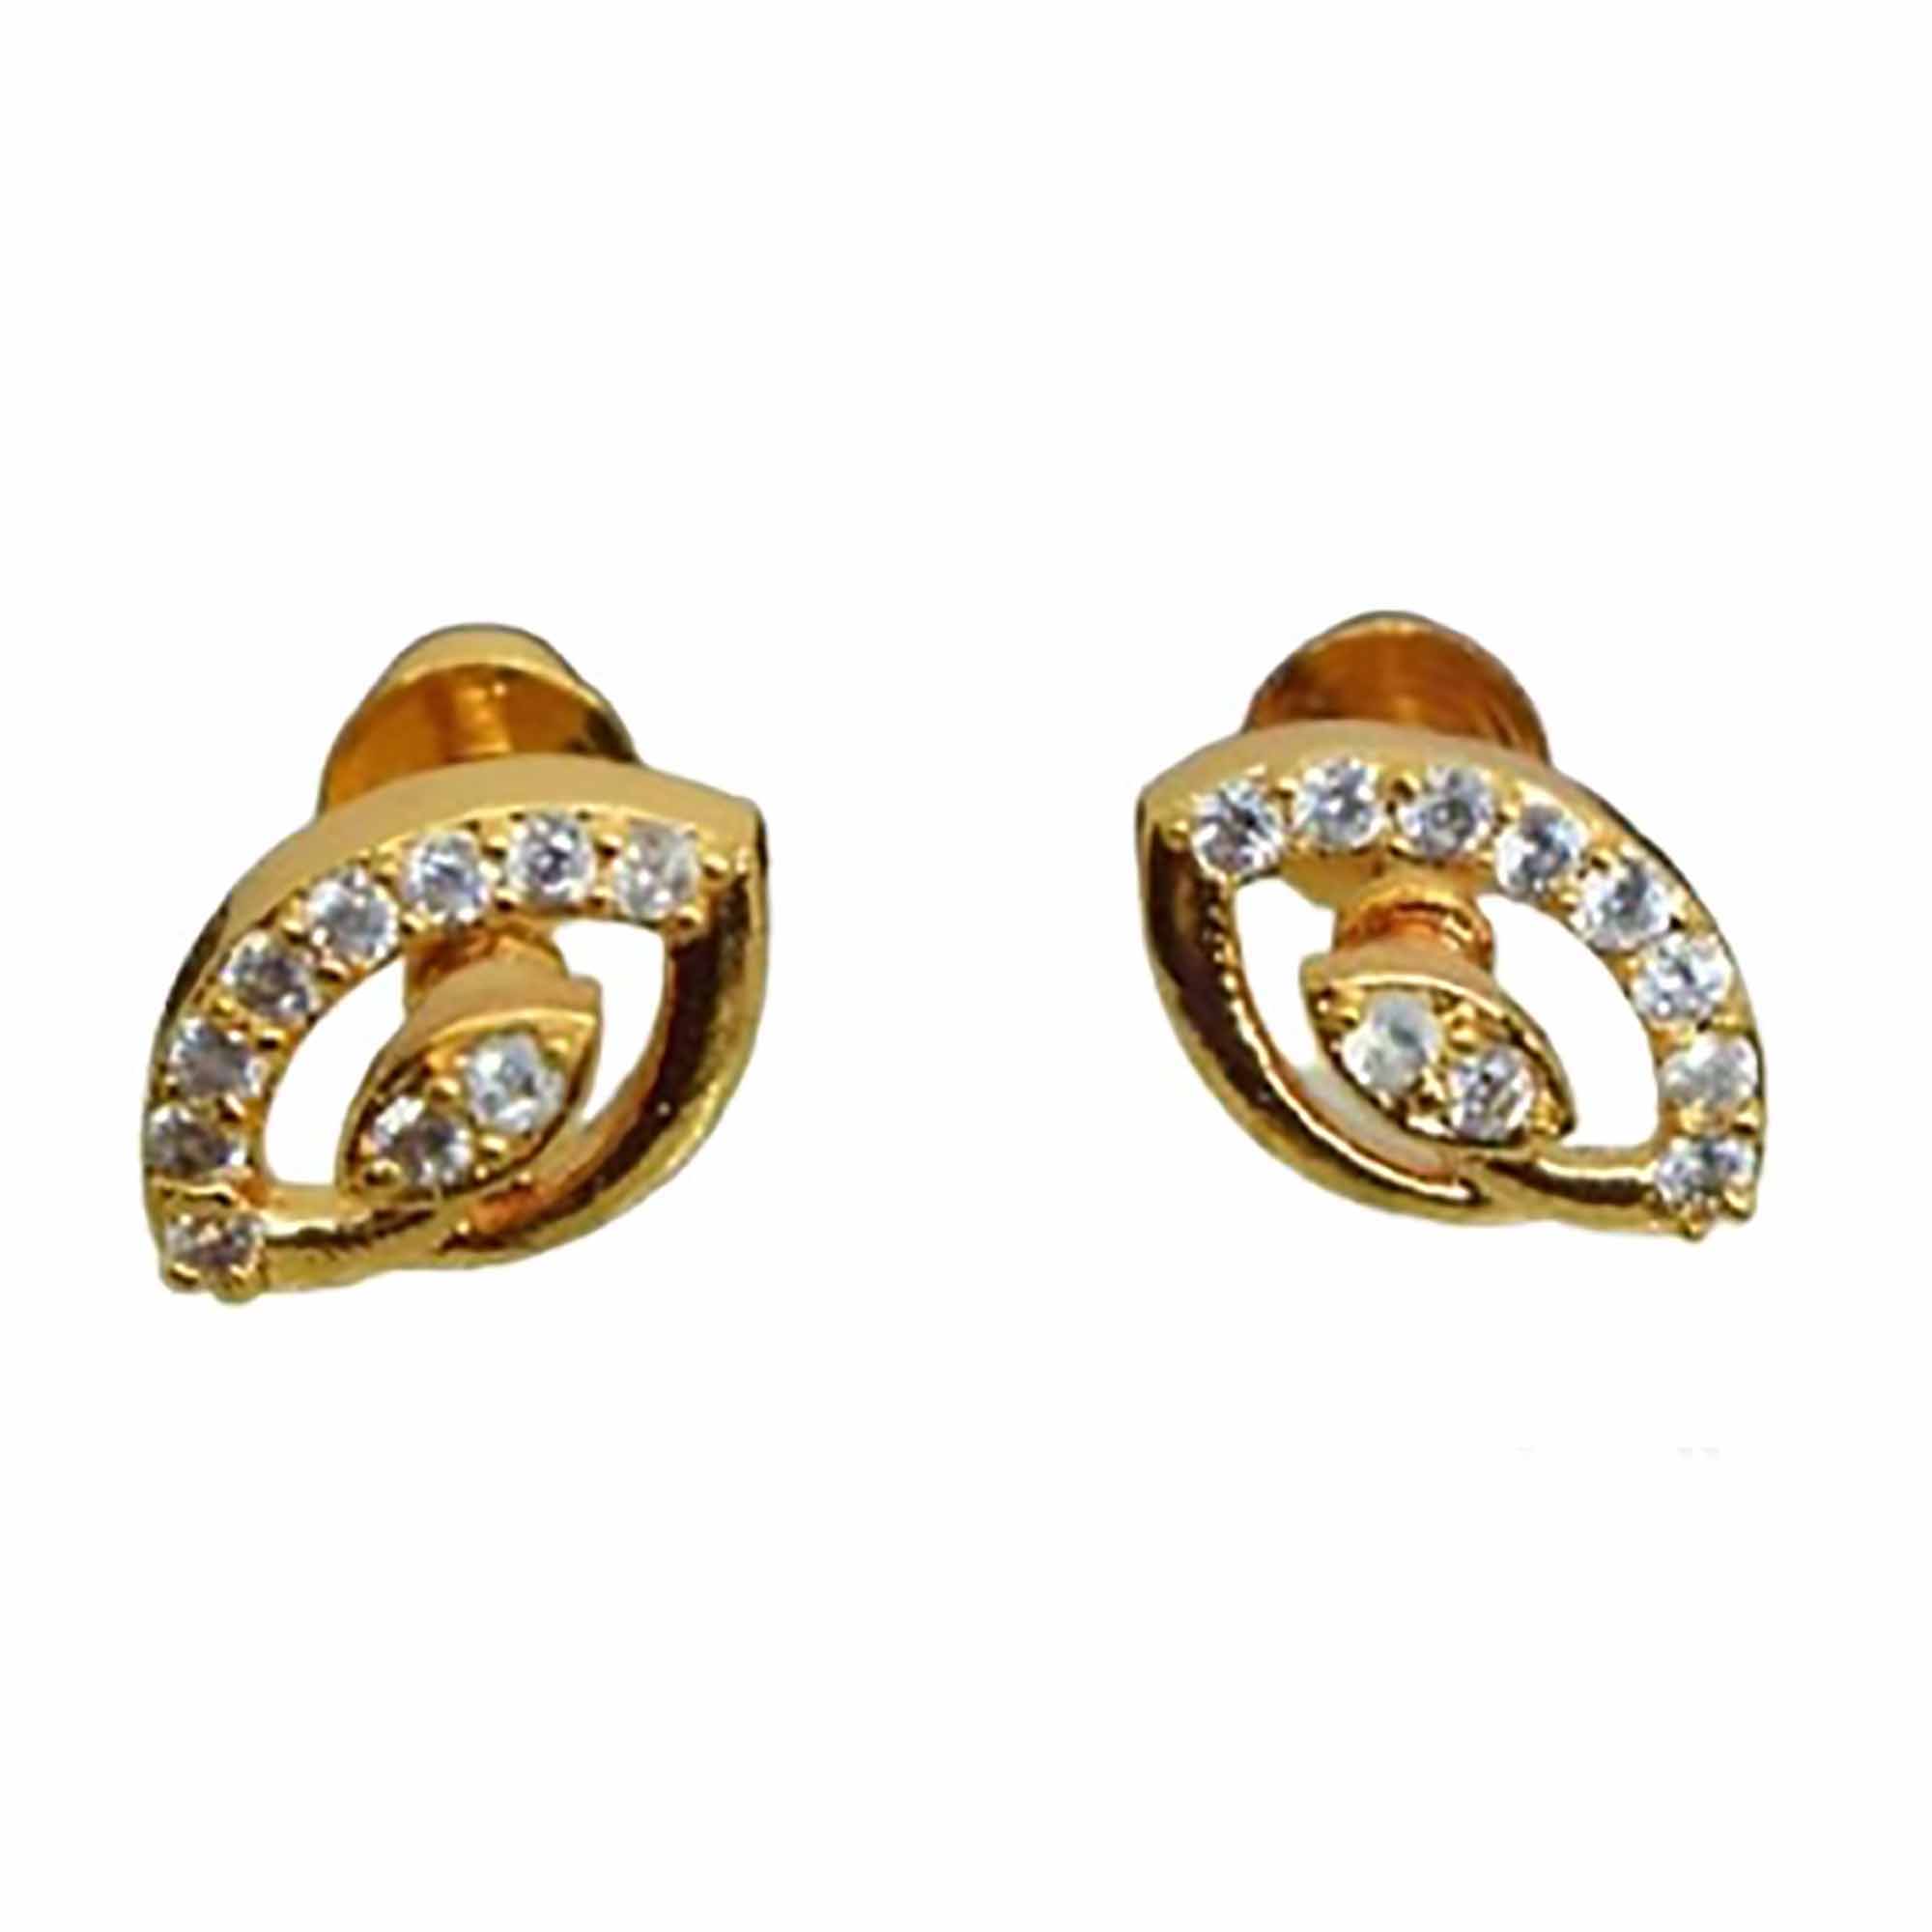 Gold plated Stylish Look Eye Theme New Earring With White stone Stud earrings NowBuy.lk 3